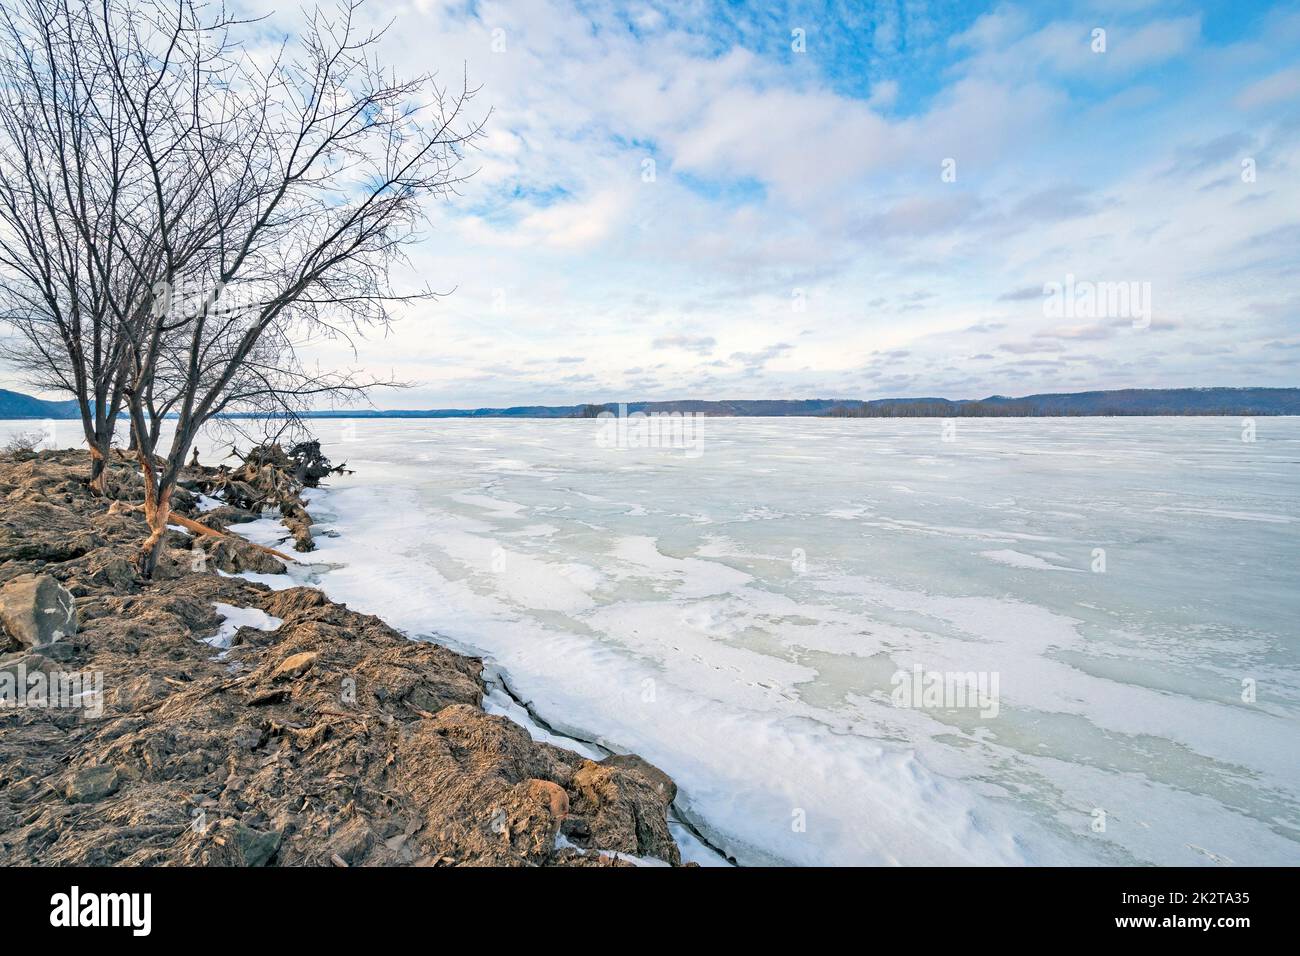 Frozen Rvier in the Upper Midwest Stock Photo